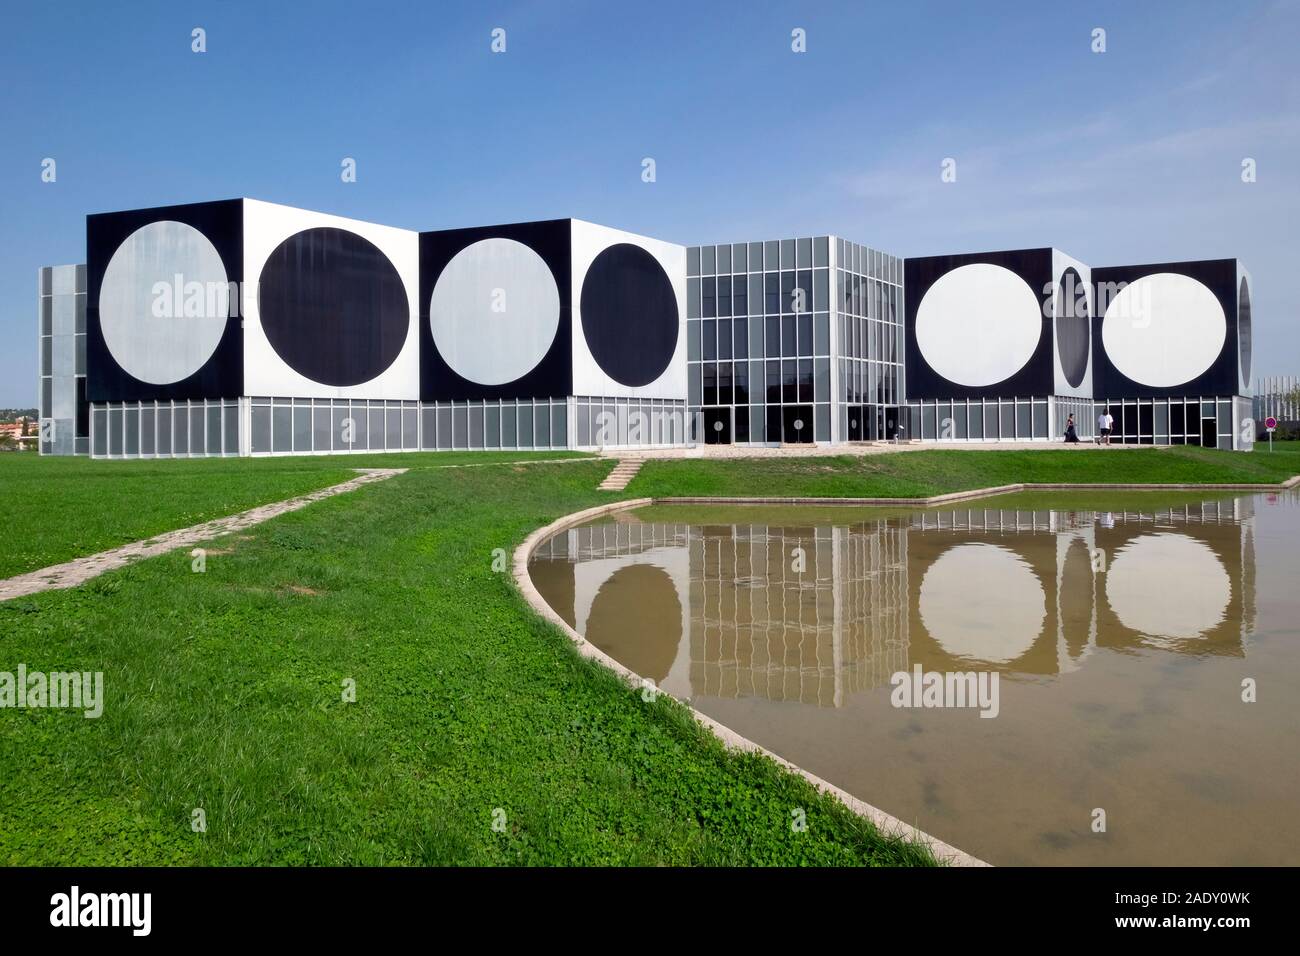 Vasarely Foundation / Fondation Vasarely Museum, Aix-en-Provence, Provence, France, Europe Stock Photo